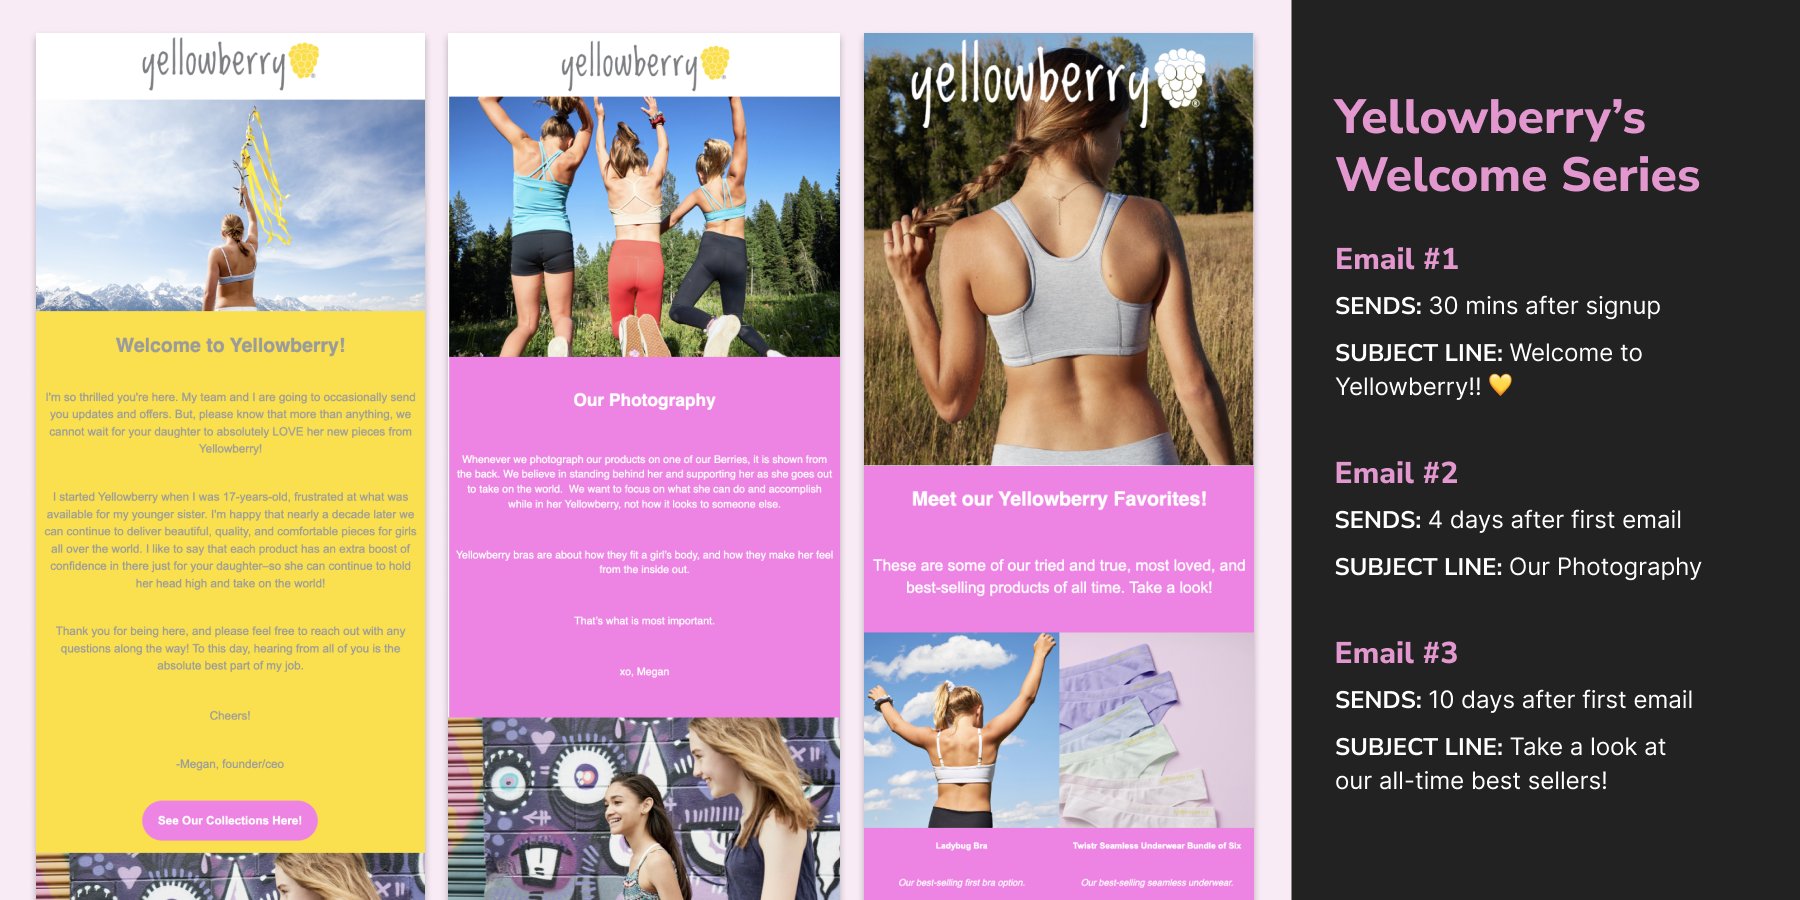 yellowberry welcome series